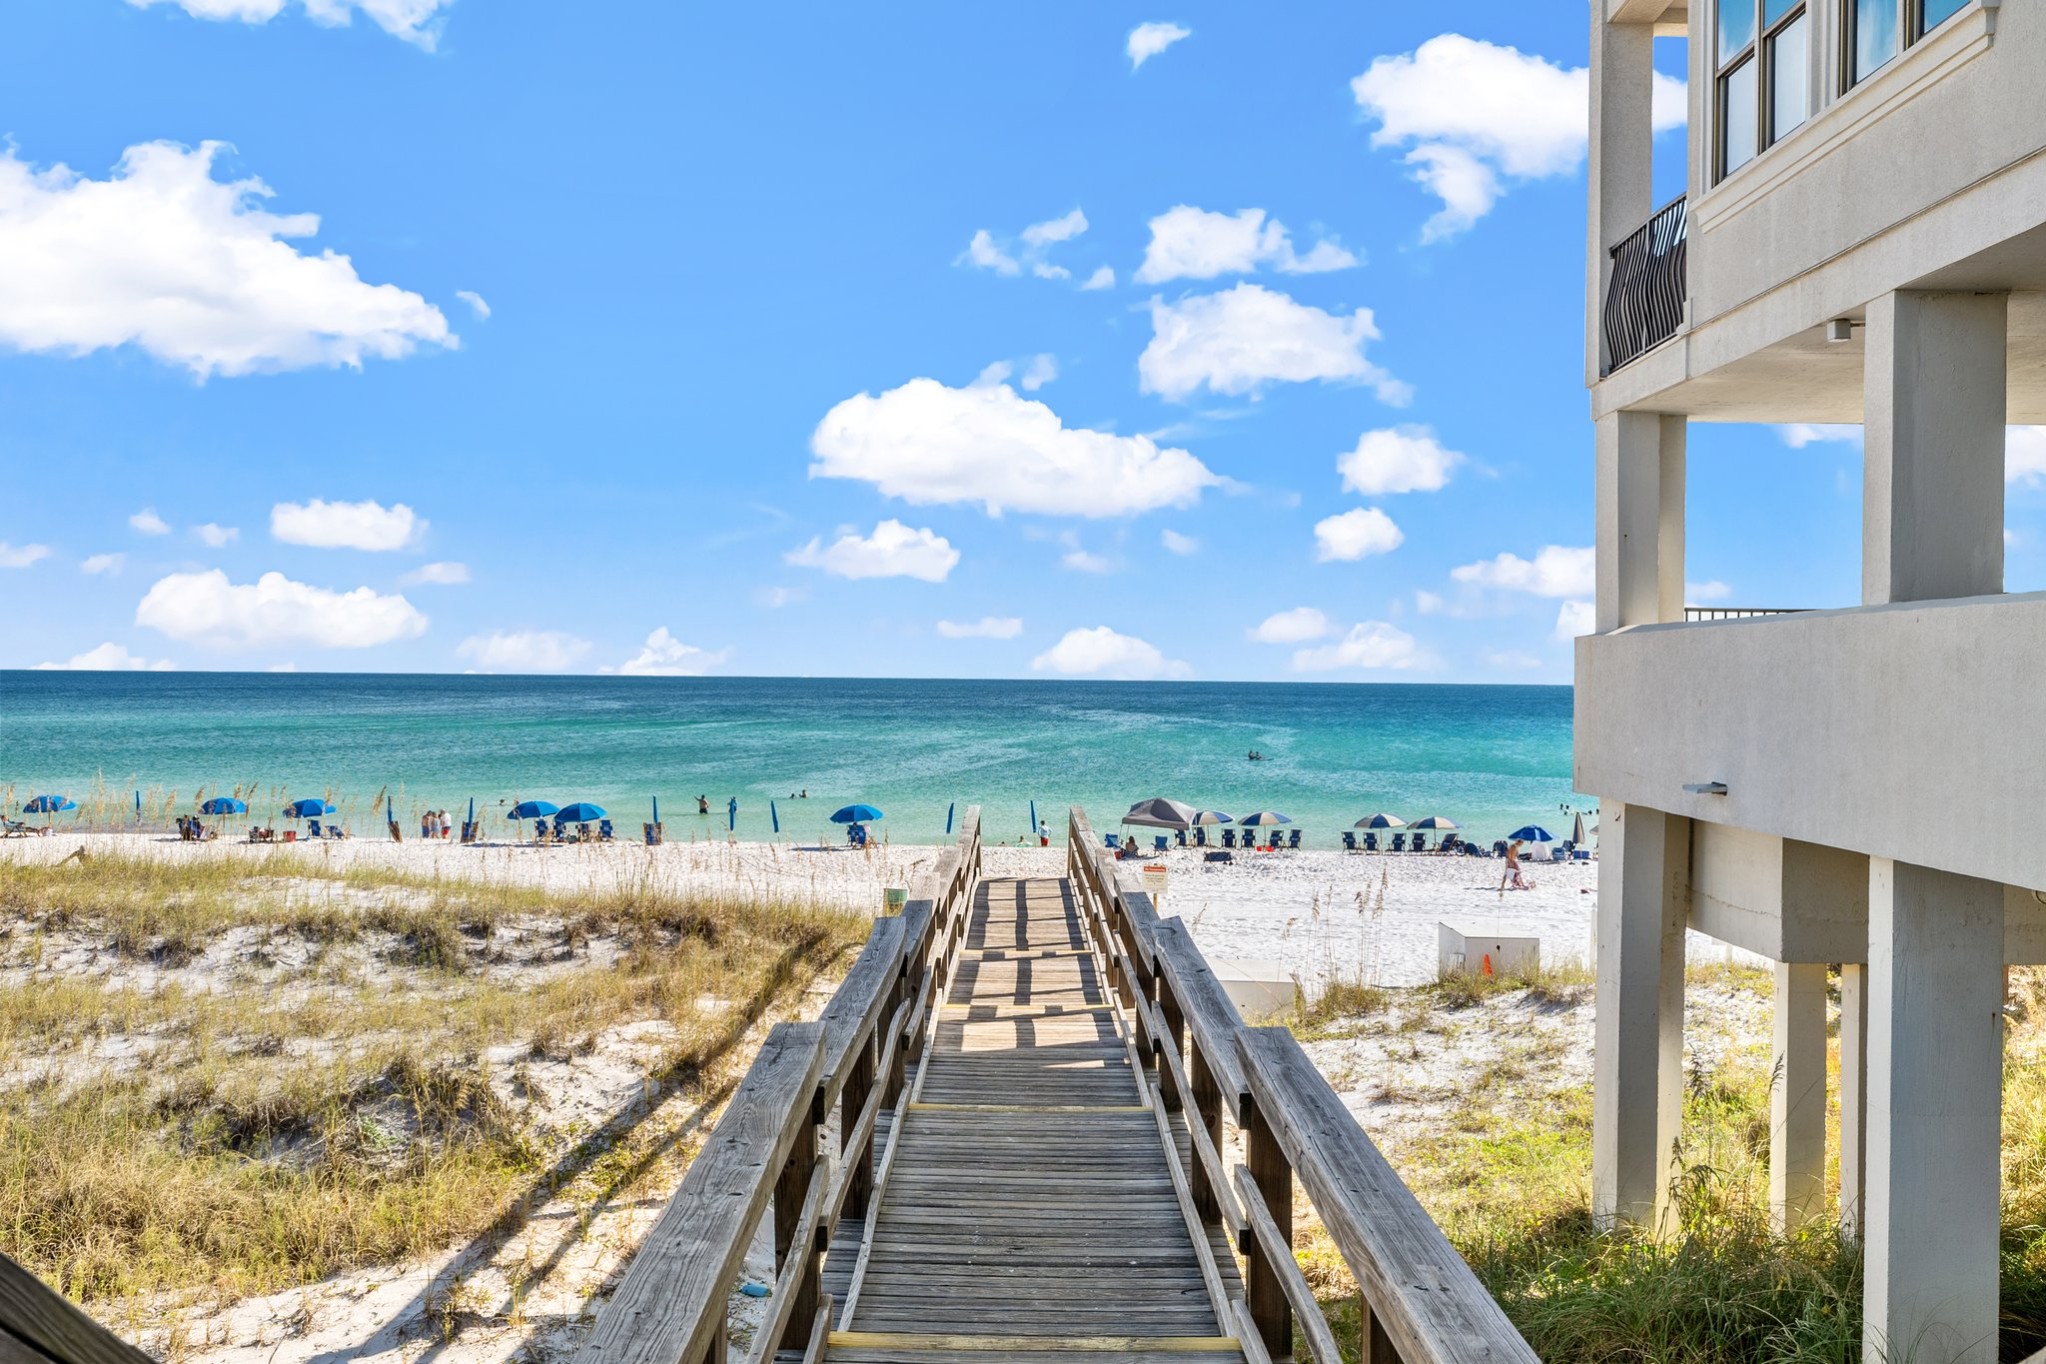 Private beach access to guests via gate, step out to soft white sand and the emerald waters of the gulf